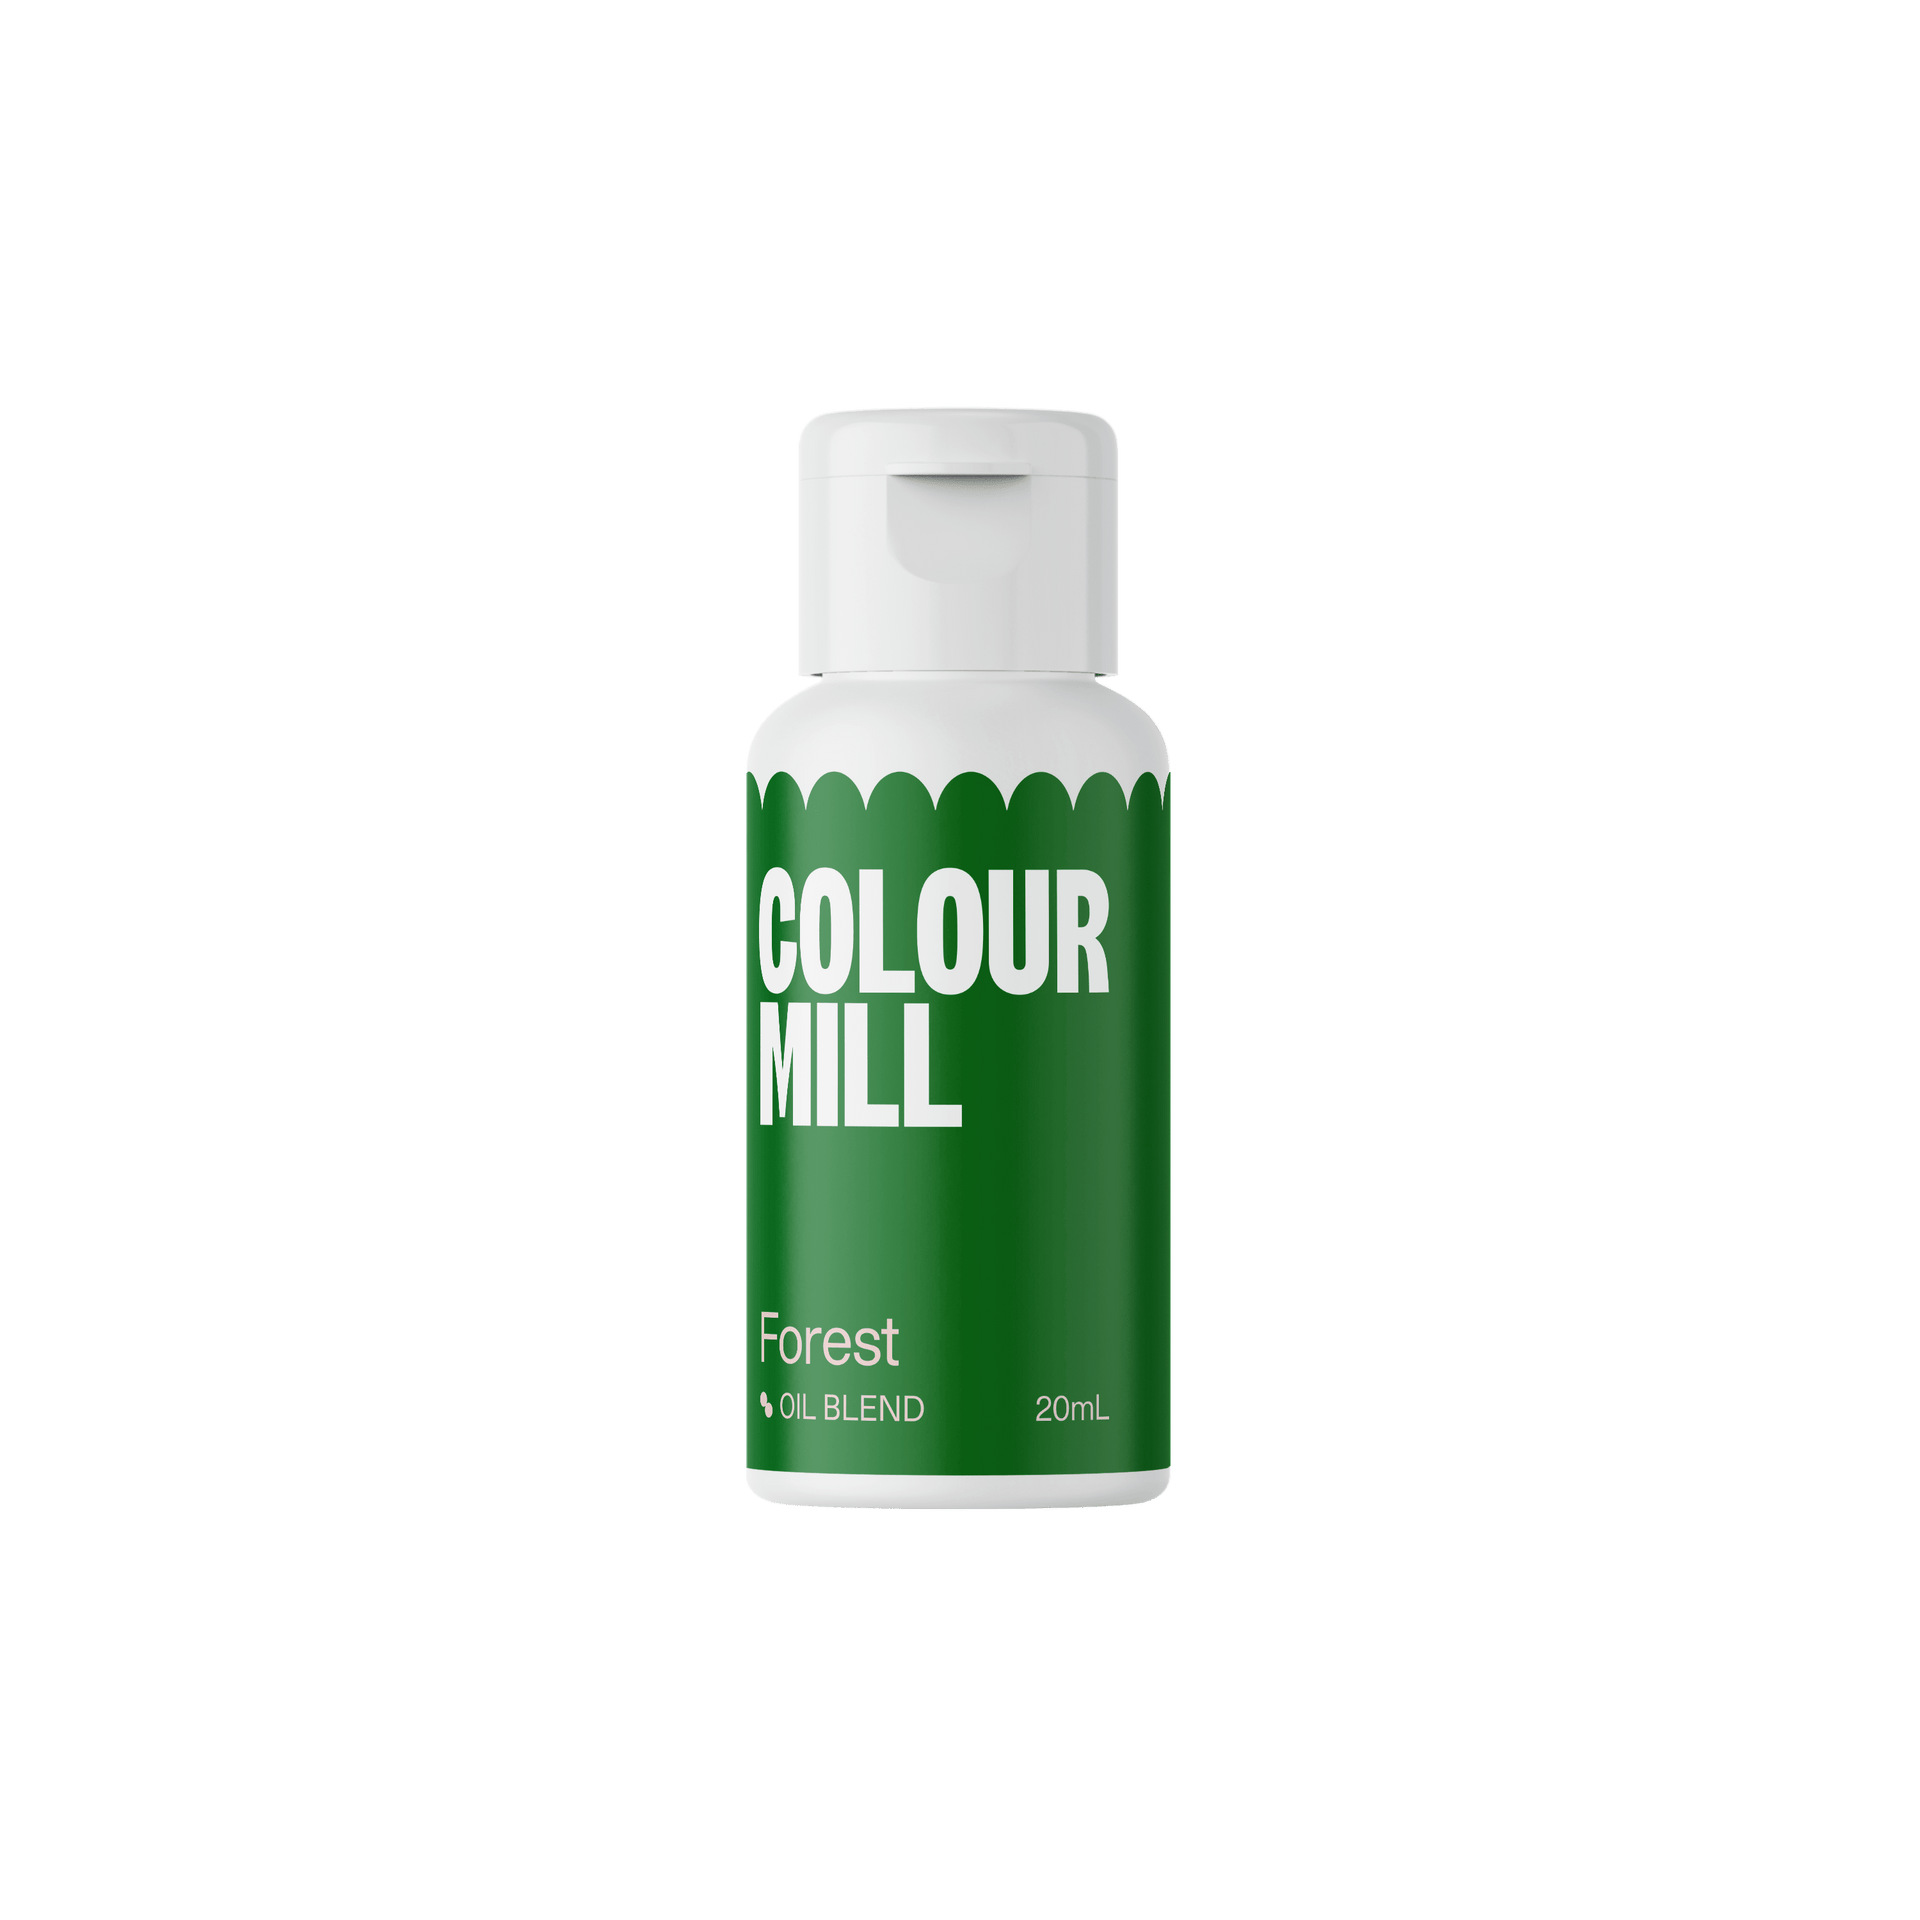 Colour Mill - Oil Based Food Colouring - 20ml Food Colouring Colour Mill Forest 